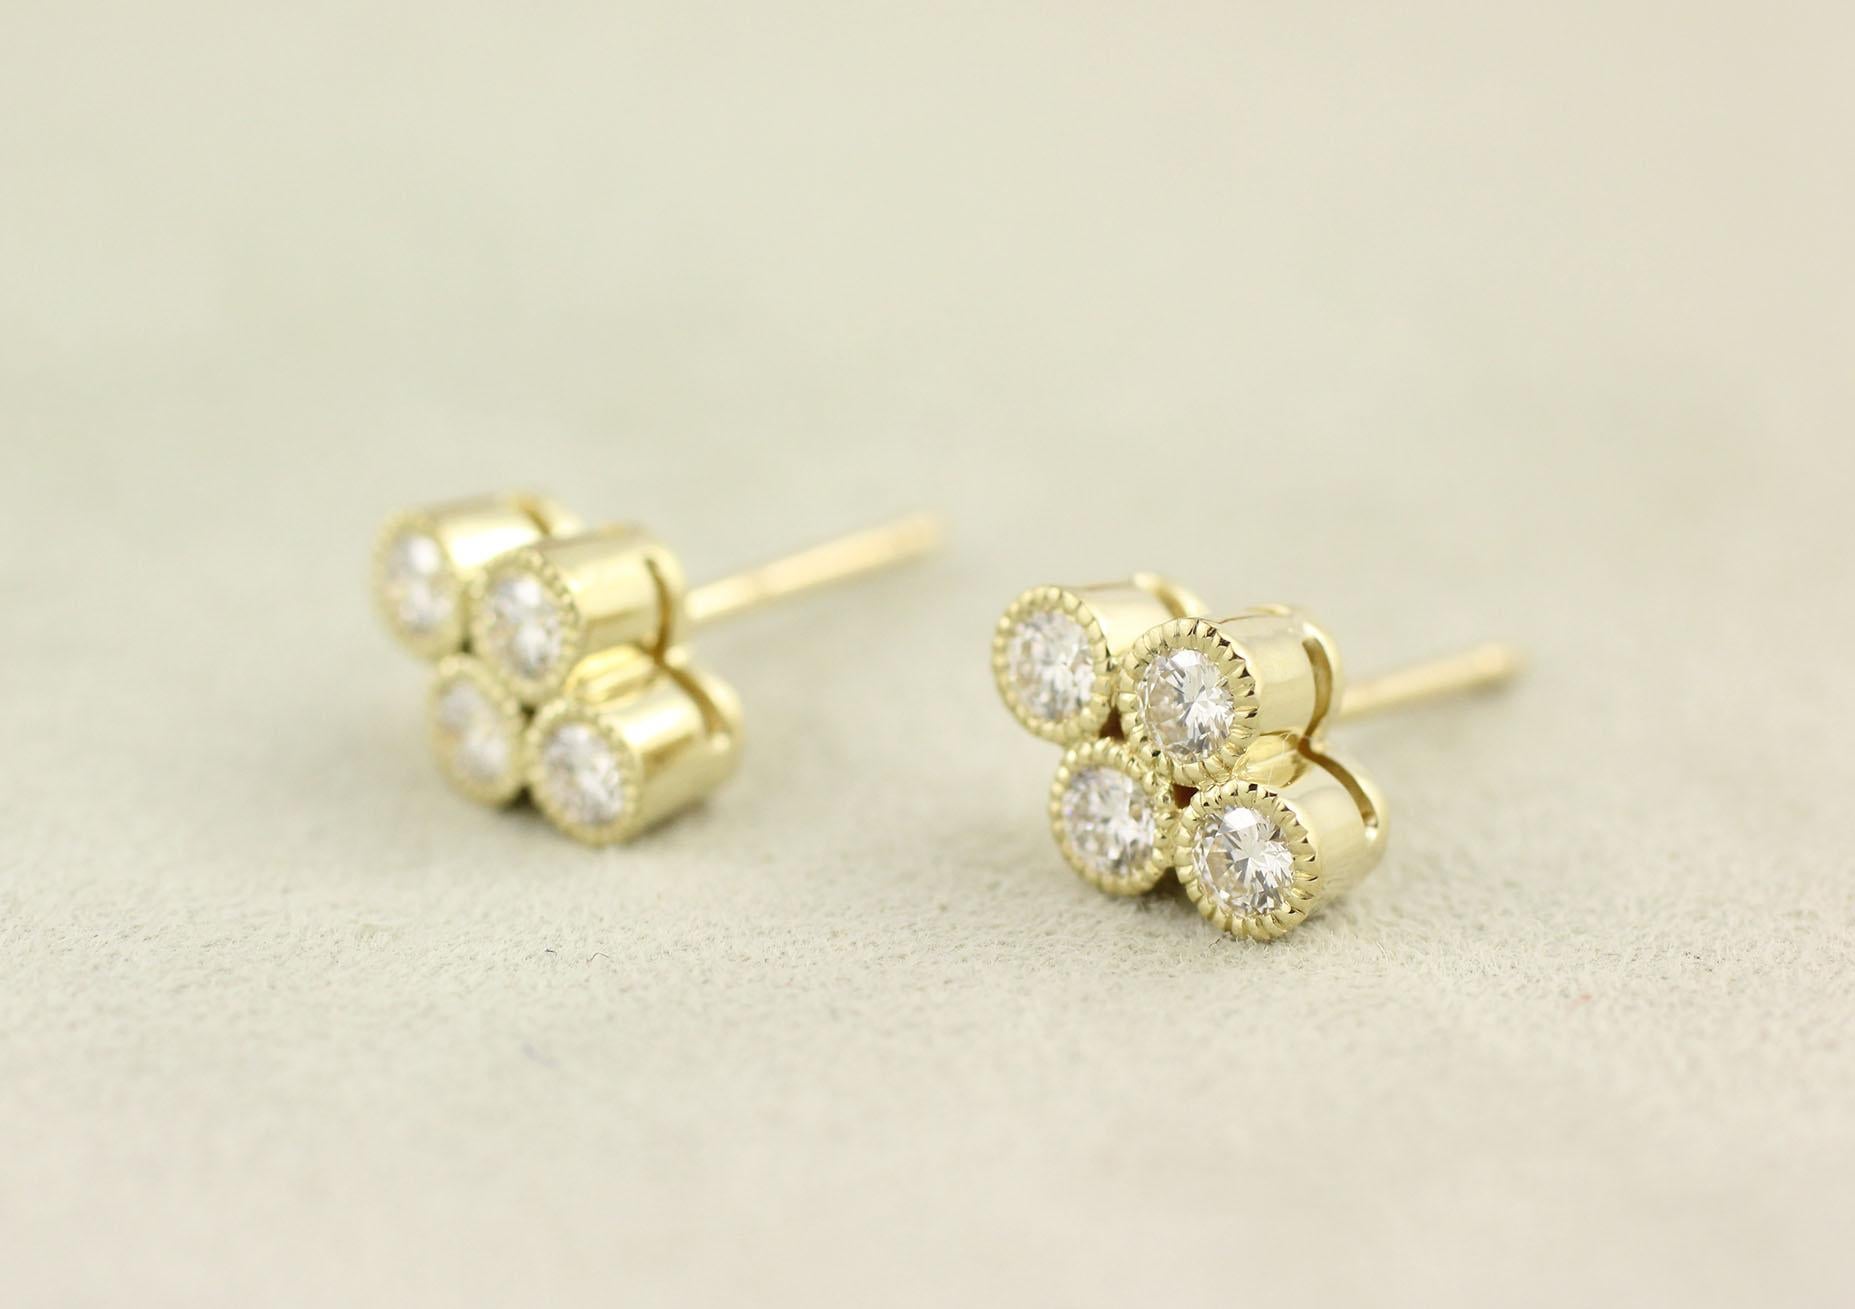 These 18 Kt Yellow Gold and Diamond Stud Earrings contain 8 Brilliant Cut Diamonds (.44 Cts.).  A perennial Julius Cohen favorite, these earrings can also accommodate drops.  Please email or call us to inquire about drop options and